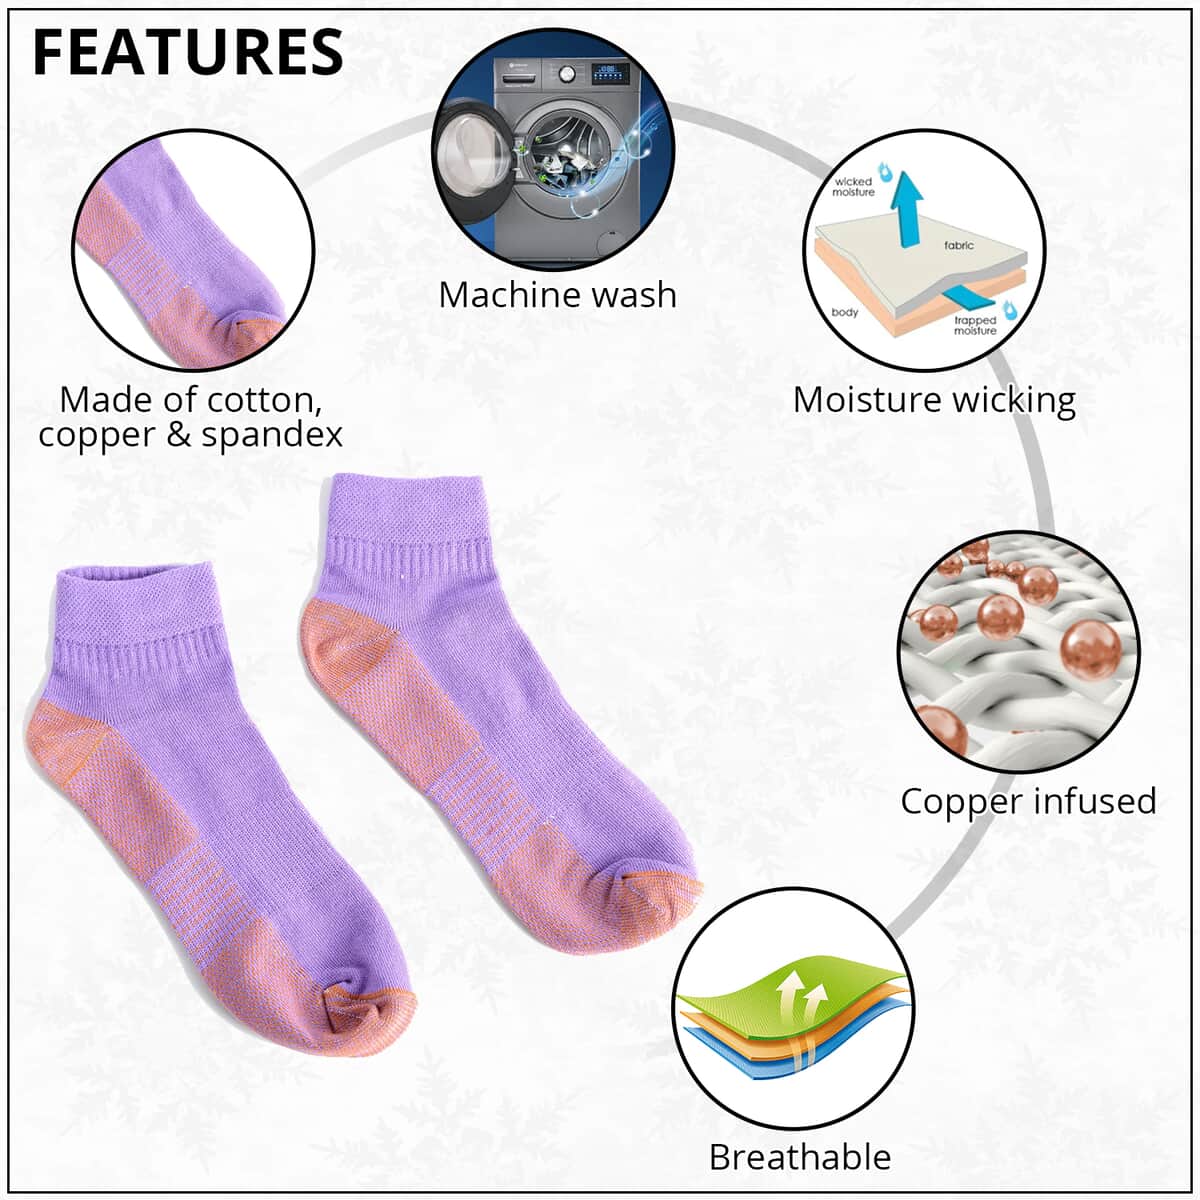 Set of 4 Pairs of Ankle Length Odor Free Copper Compression Socks For Men And Women, Premium Material Moisture Wicking Unisex Copper Infused Socks - Lavender, Teal, Beige, Wine (L/XL) image number 1